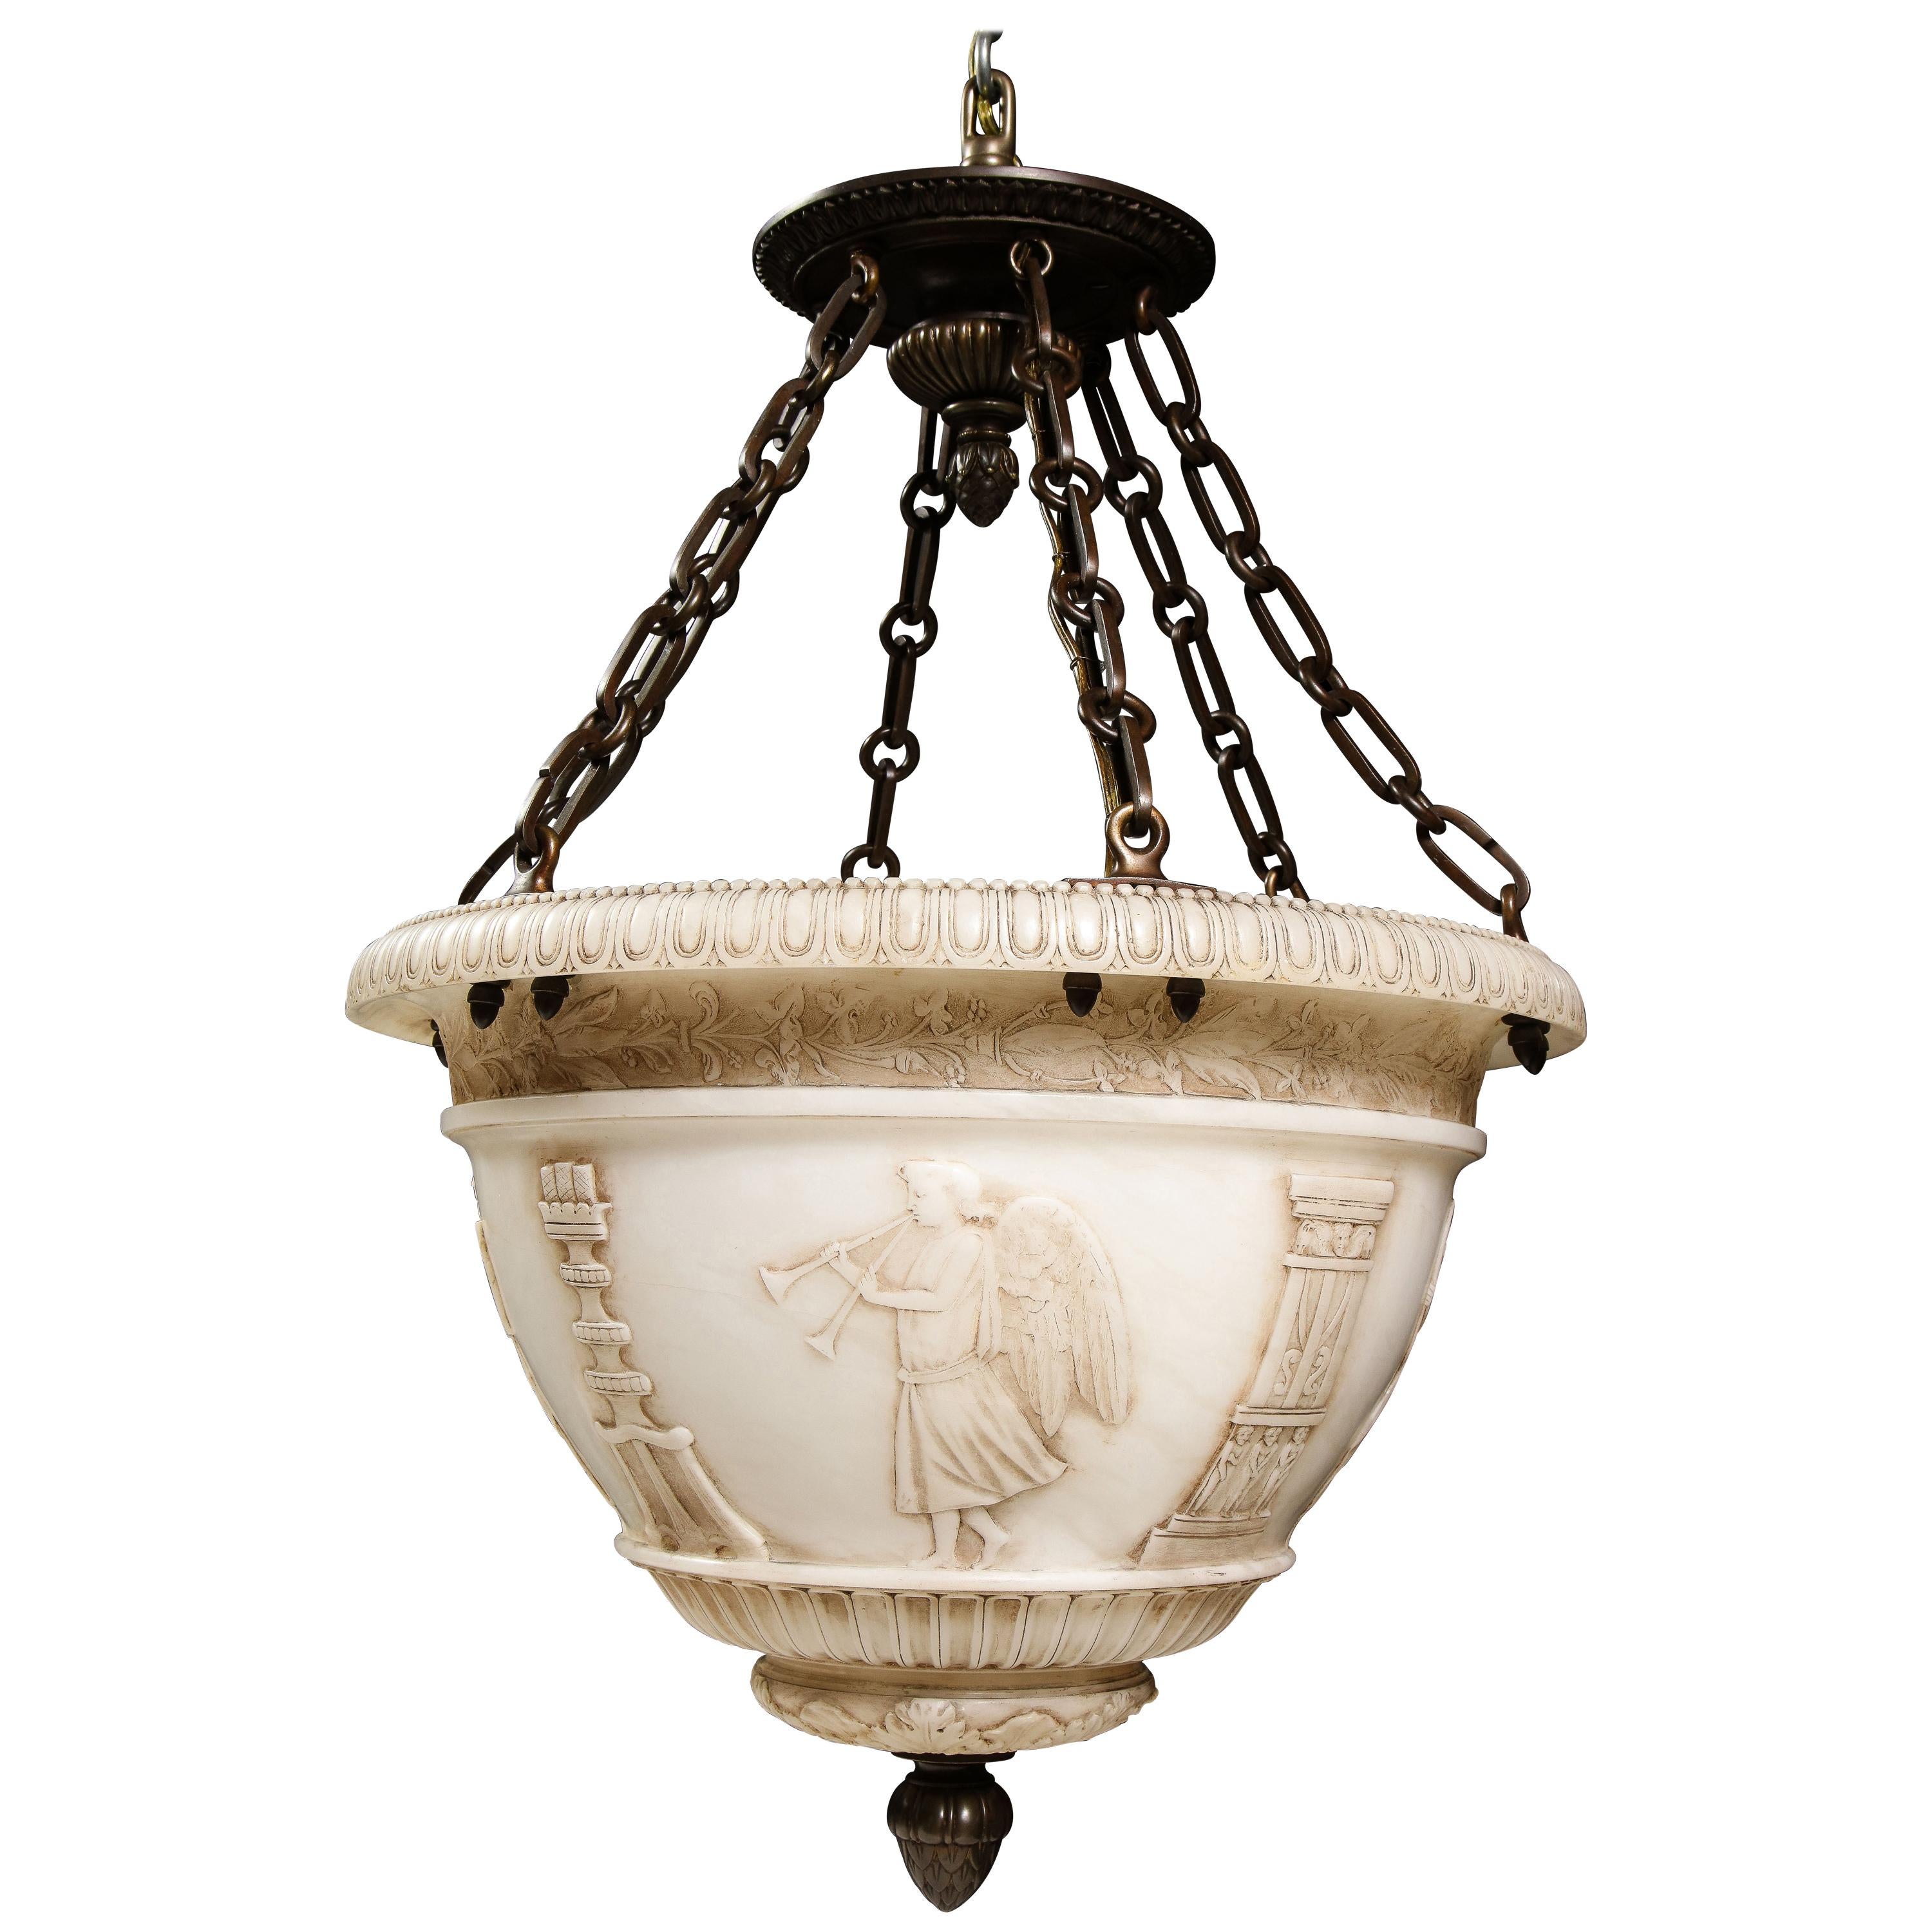 A Fine Antique French Neoclassical Style Carved Alabaster and Bronze Chandelier